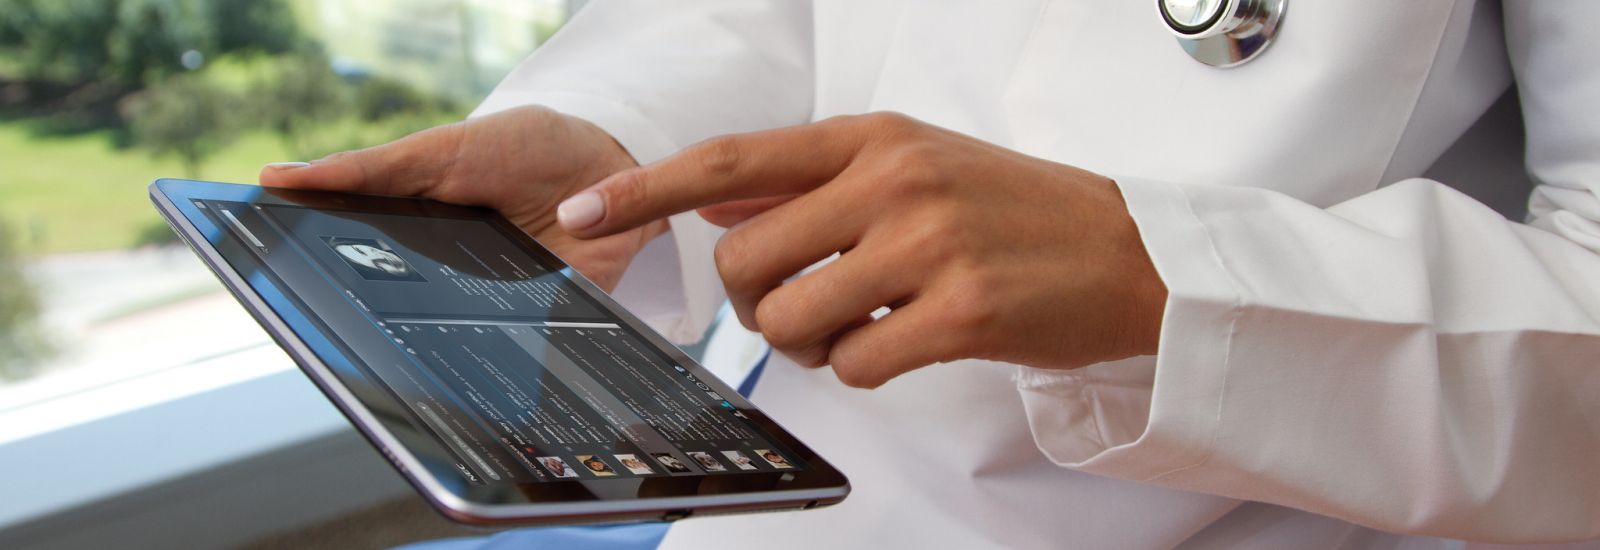 A medical professional wearing a white coat and stethoscope uses communications software on a portable tablet 